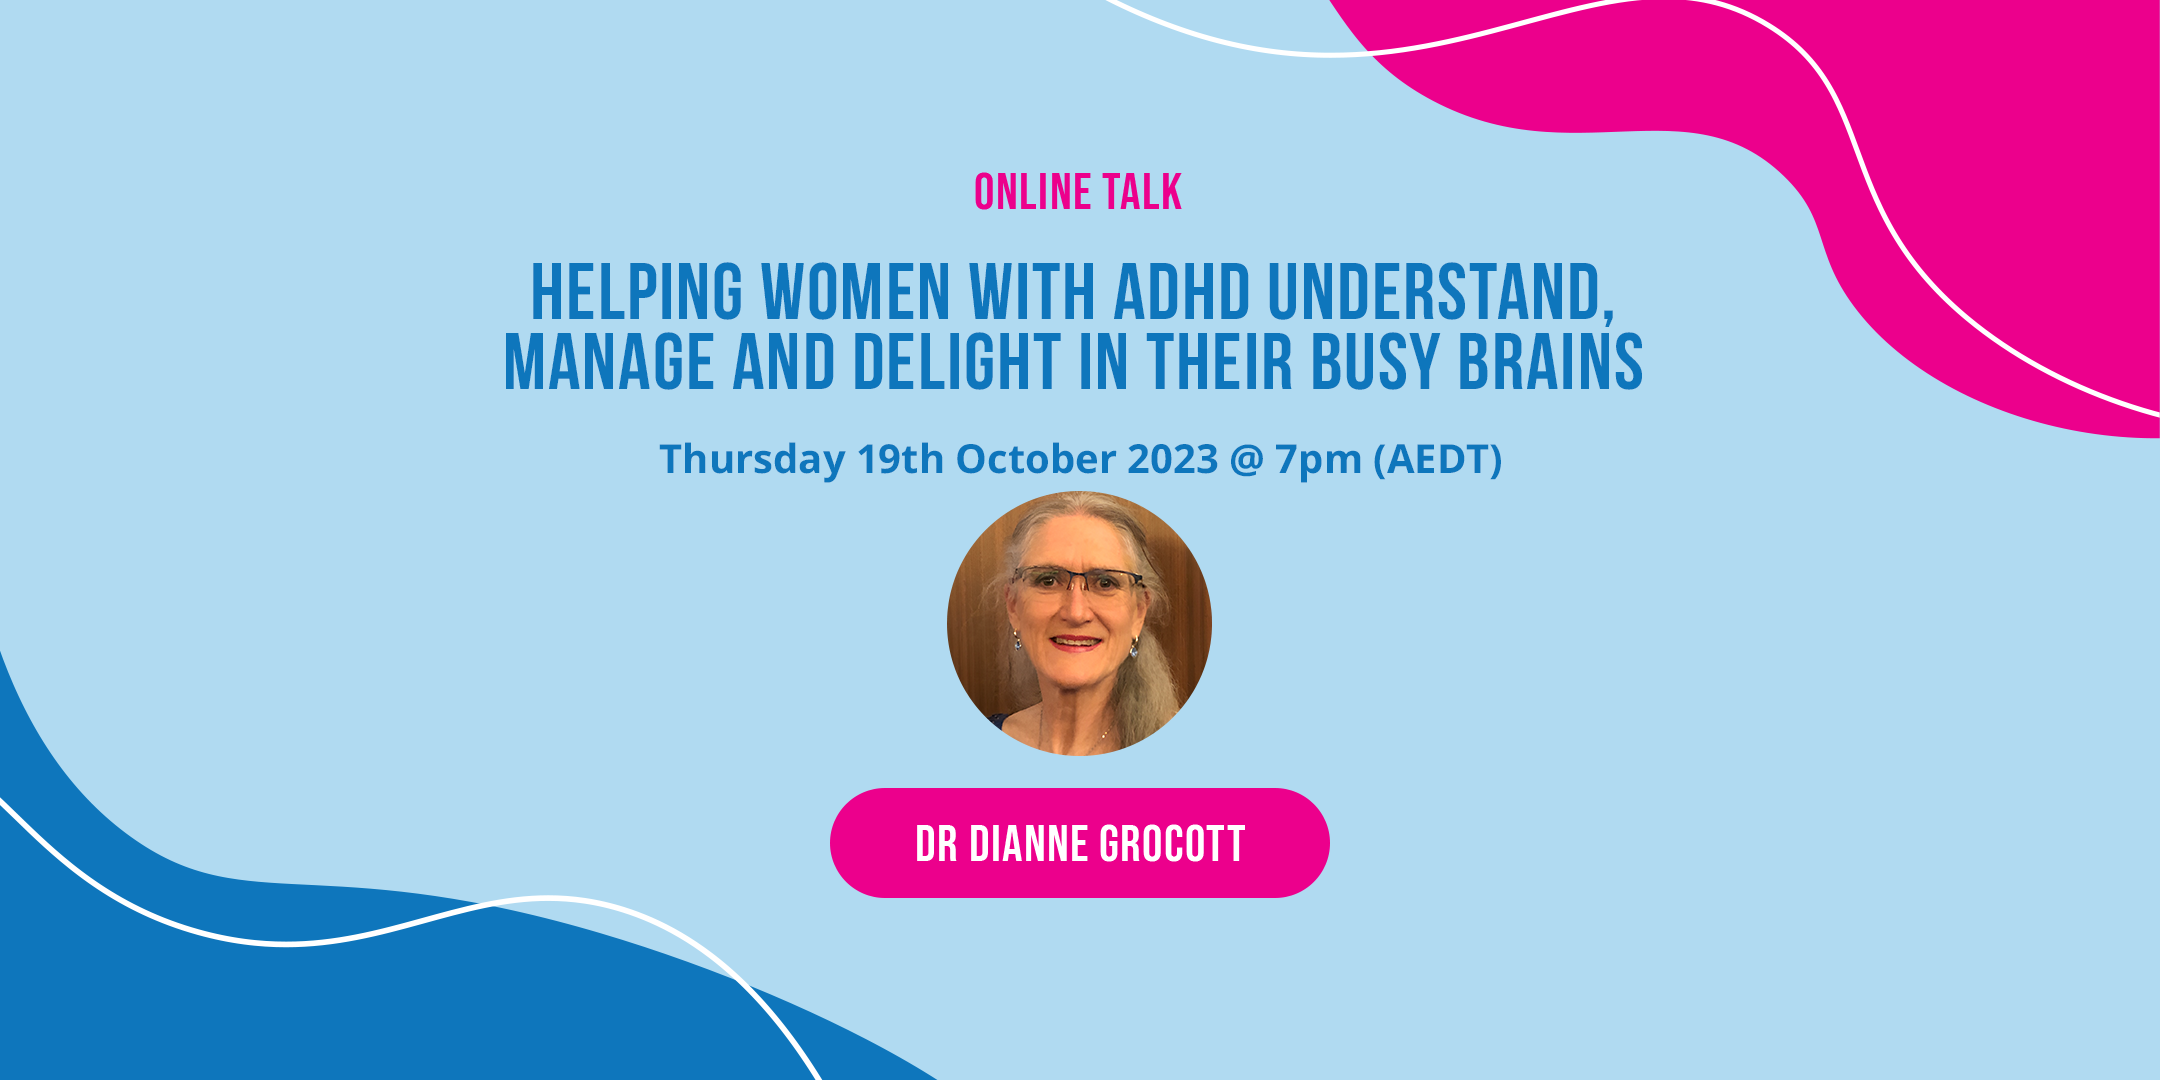 Online Talk - Helping Women with ADHD Understand Manage and Delight in Their Busy Brains. October 19, 2023 Thursday @7PM AEDT